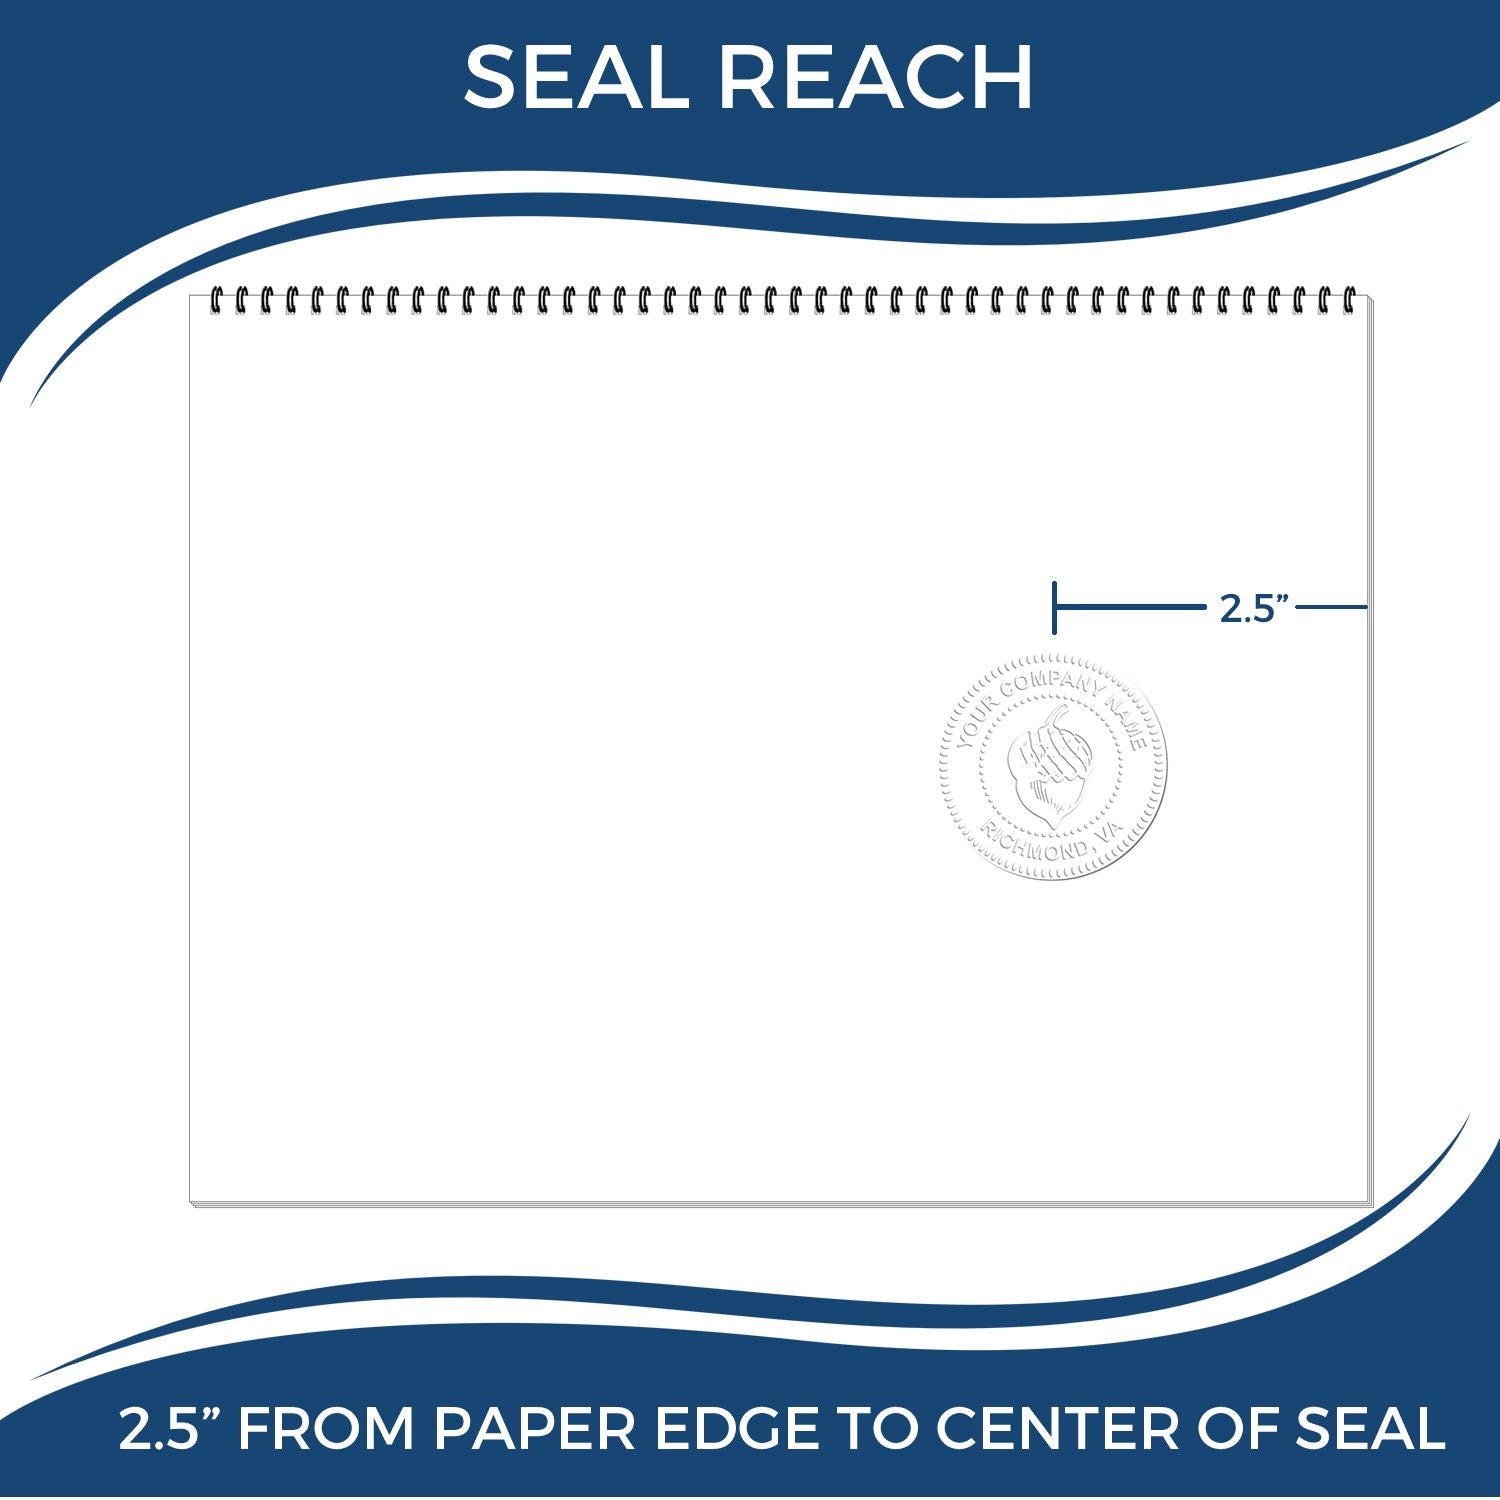 An infographic showing the seal reach which is represented by a ruler and a miniature seal image of the Heavy Duty Cast Iron North Carolina Architect Embosser